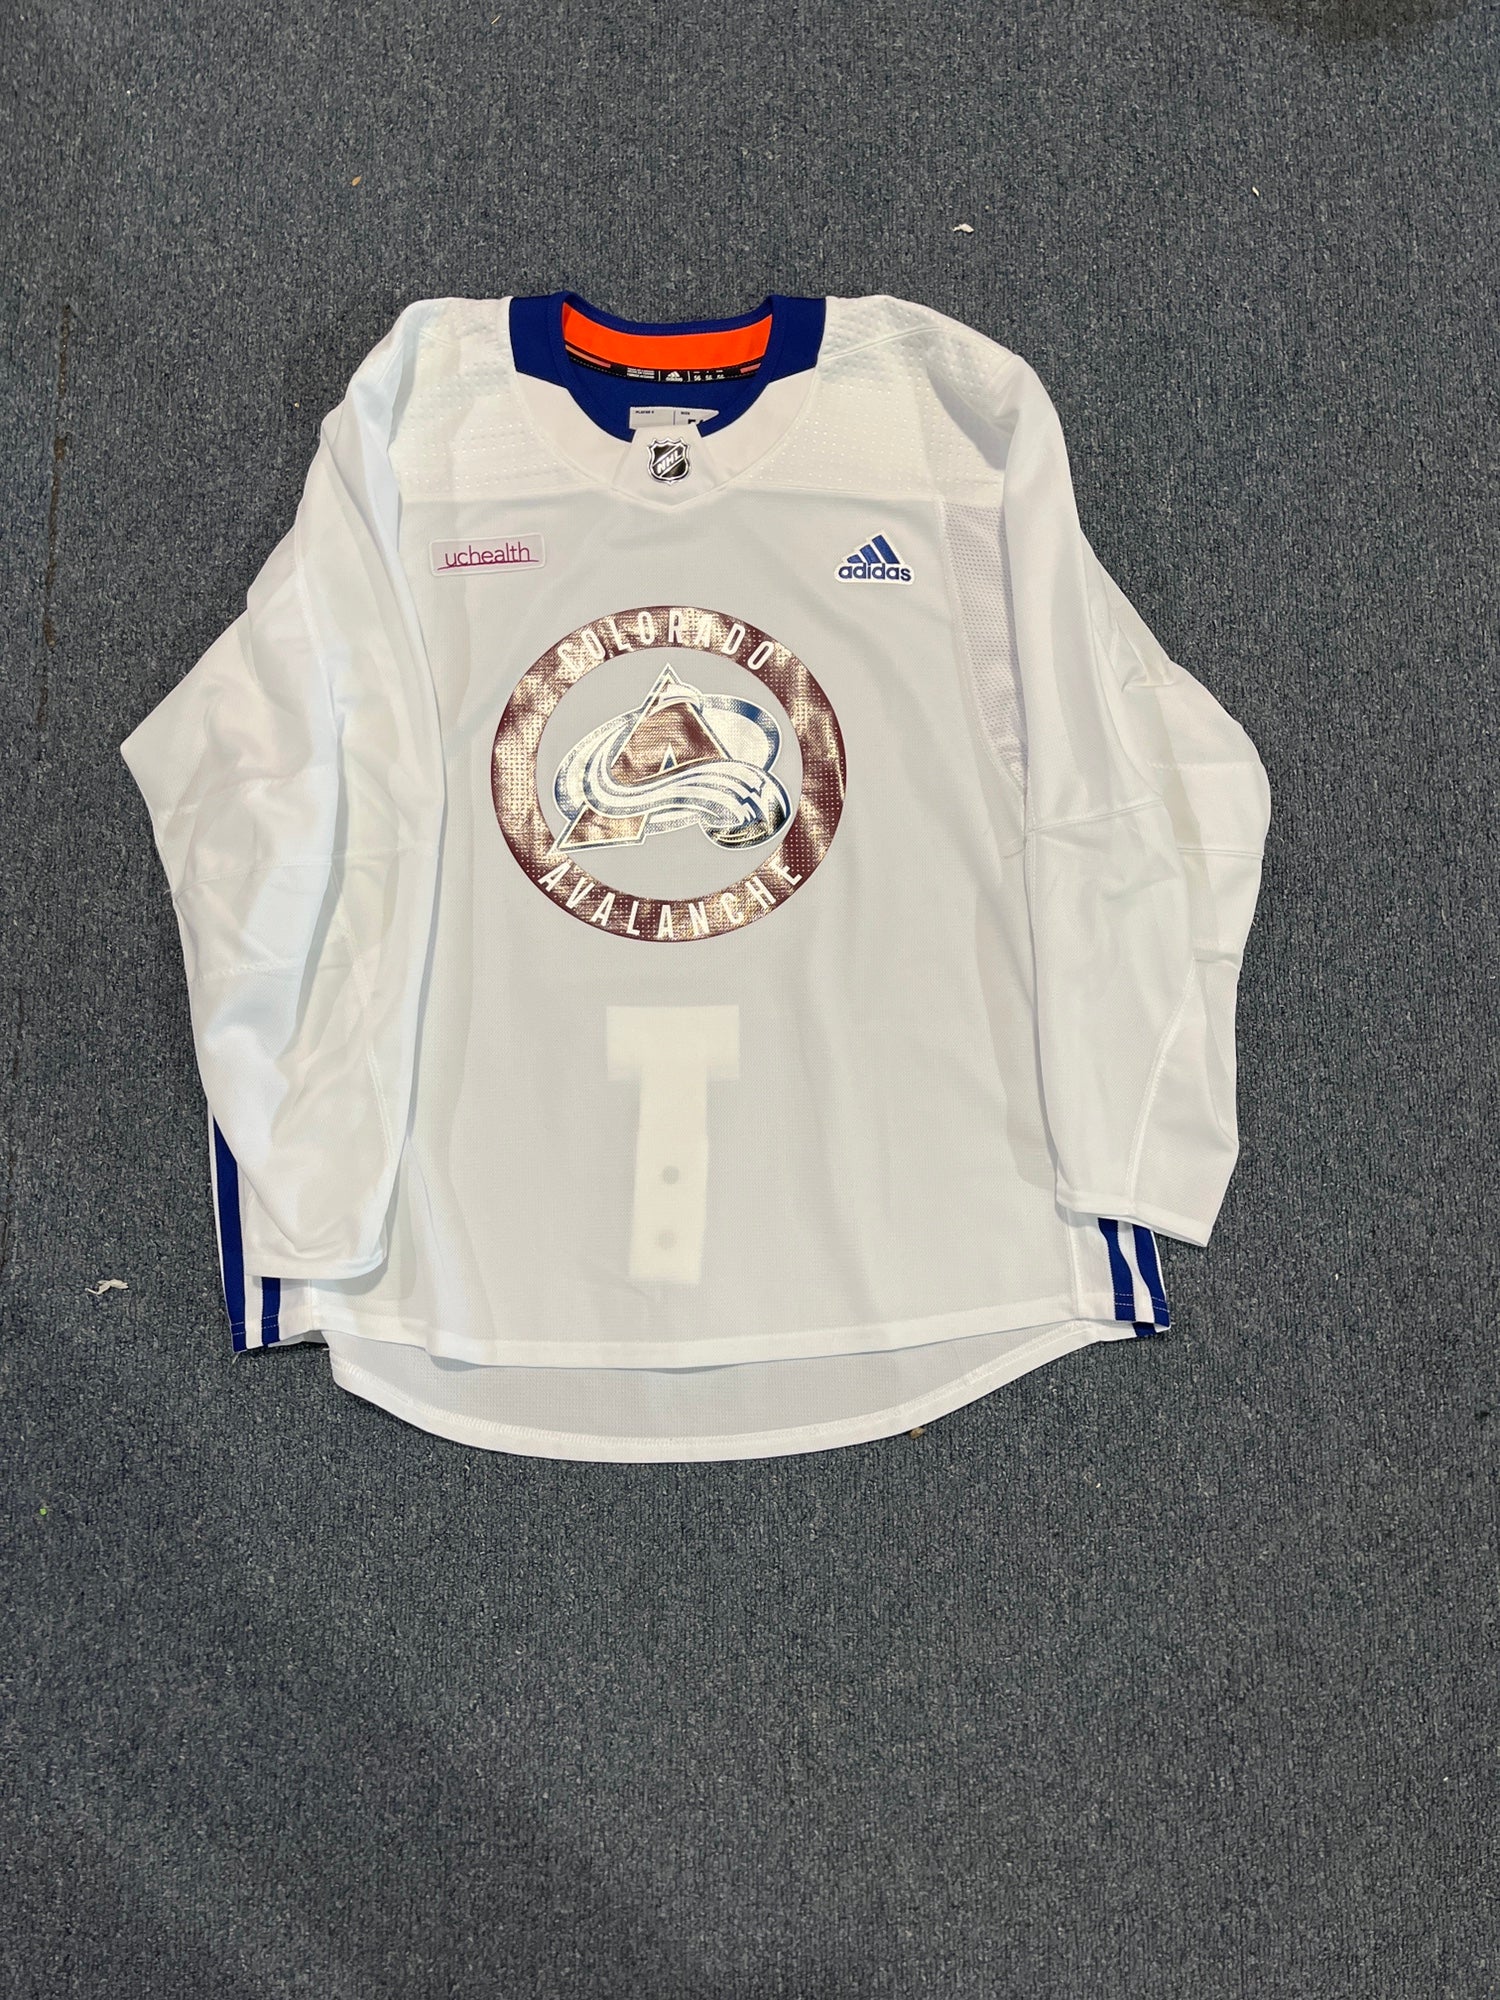 New Adidas Colorado Avalanche Team Issued MIC Authentic Practice Jersey  Size 56 Pro Stock (No Patch) | SidelineSwap